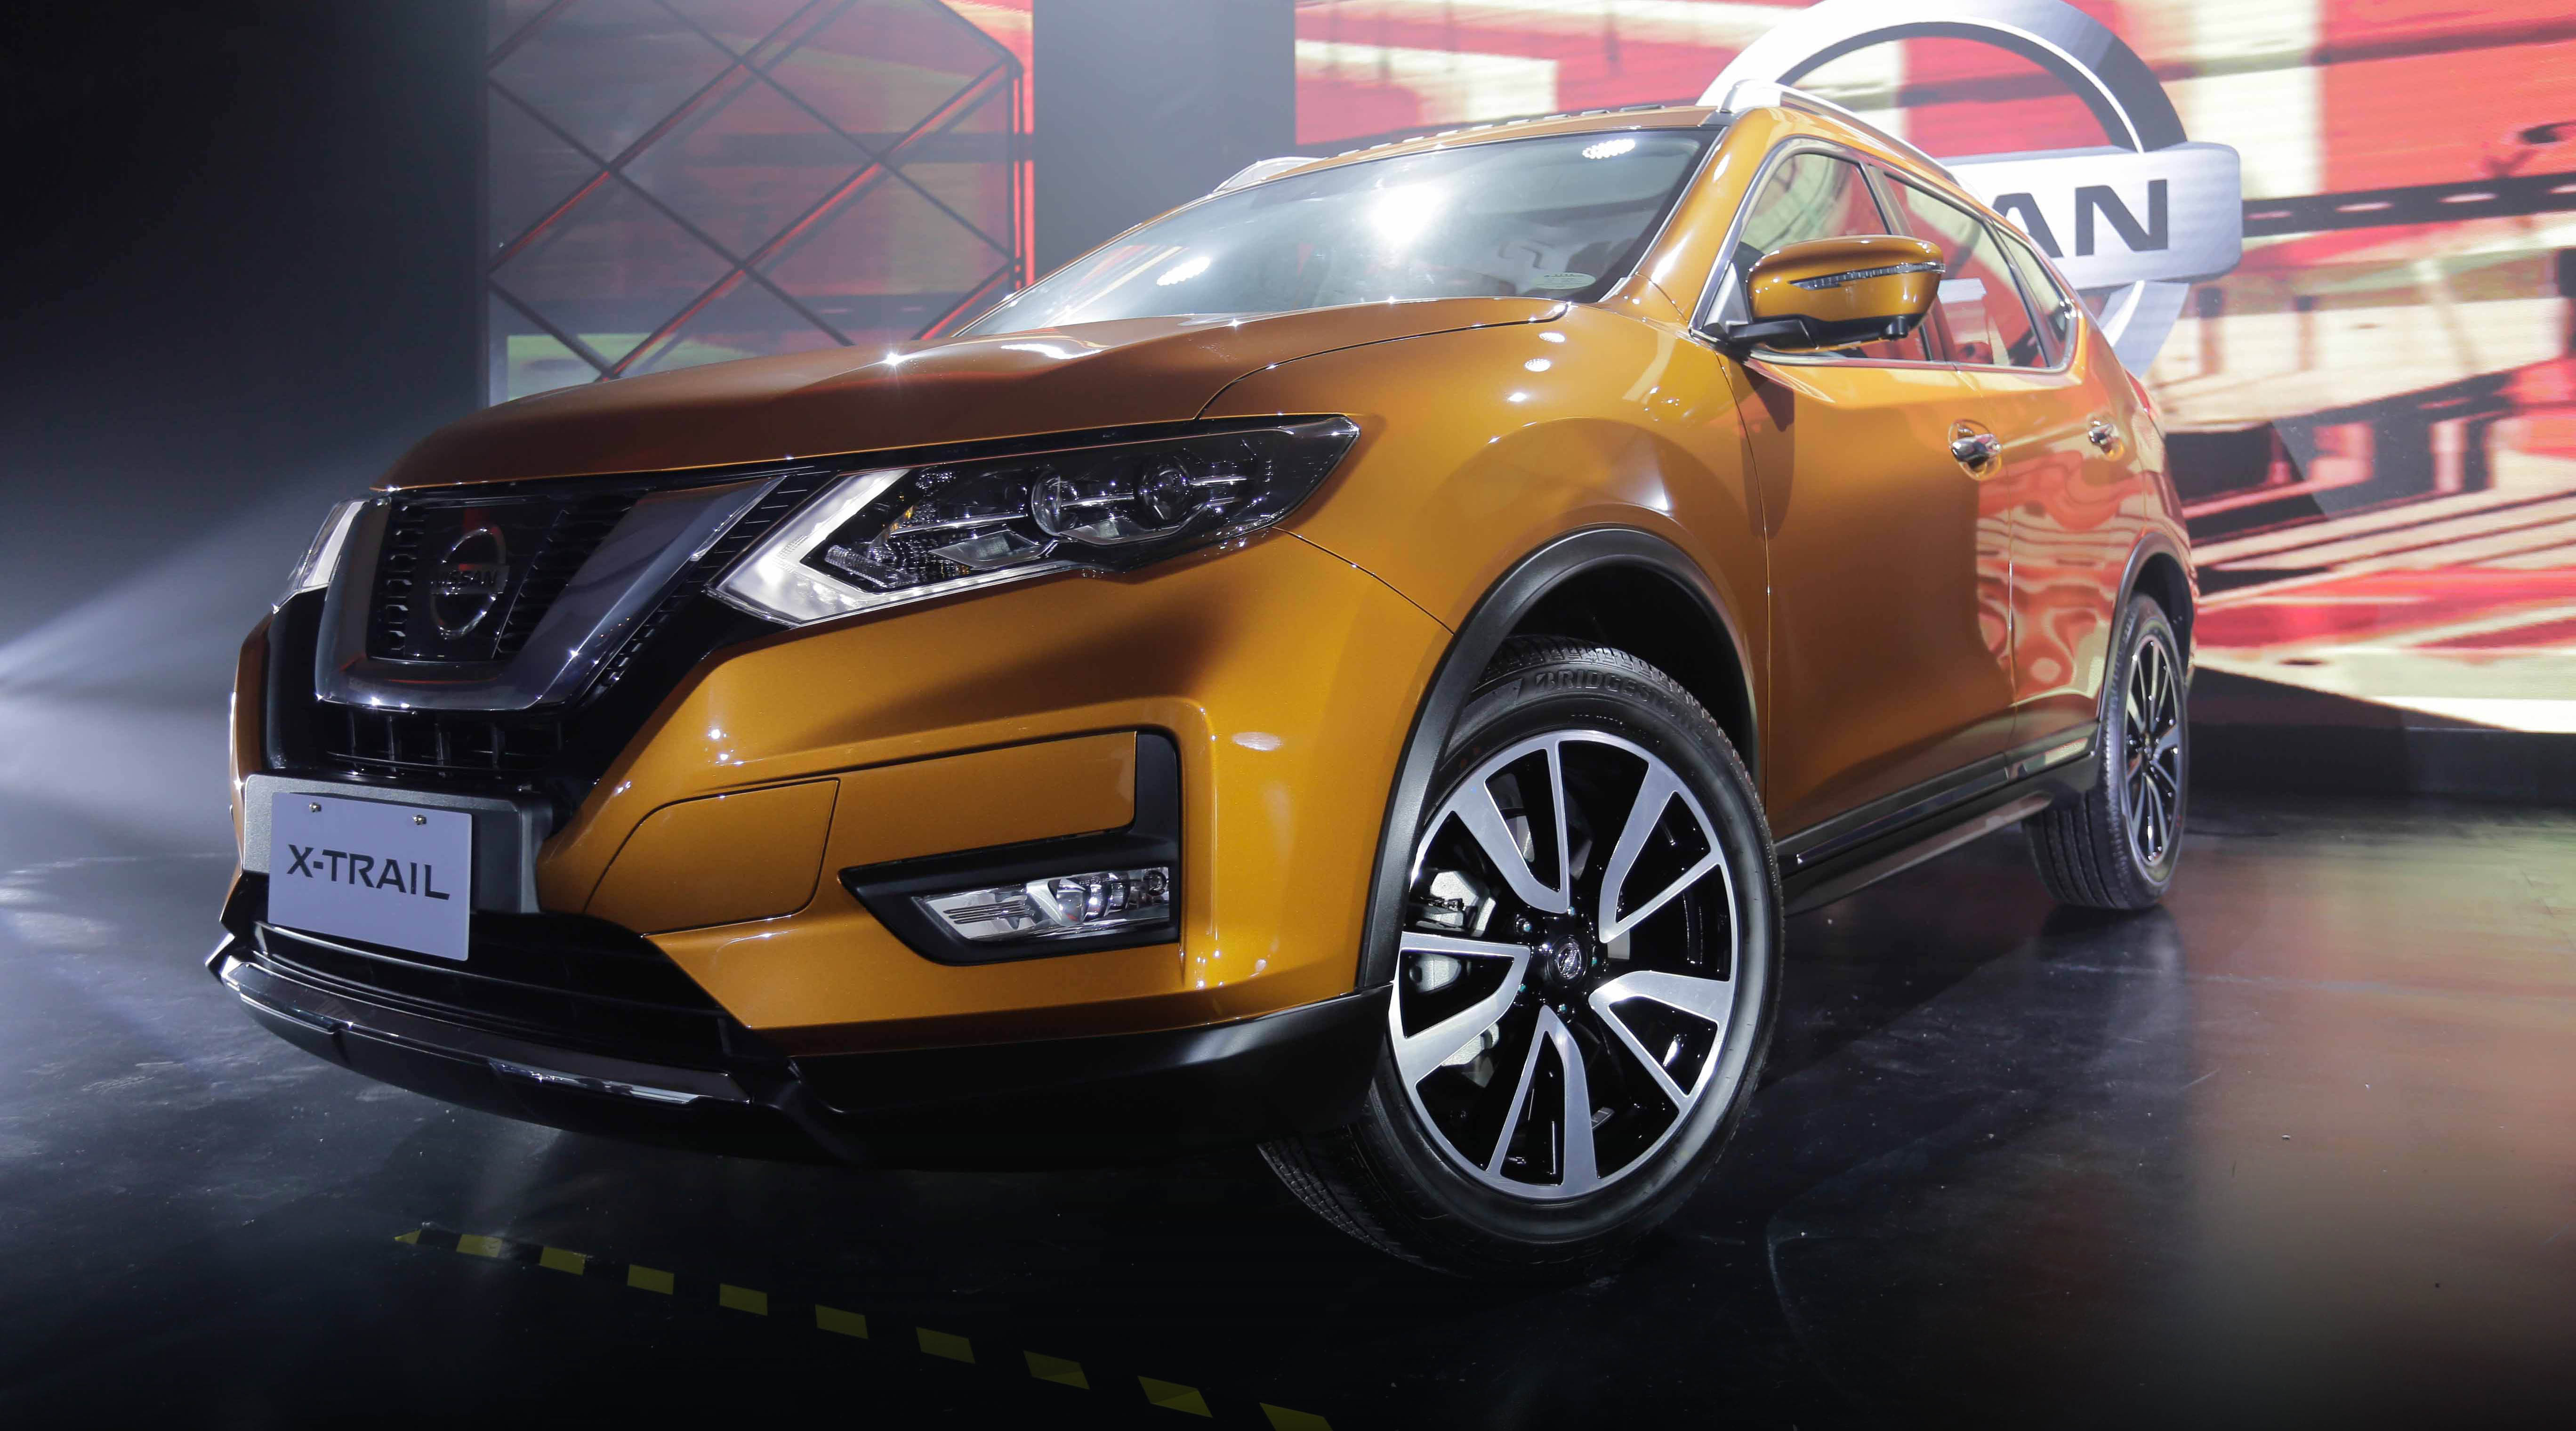 All-new Nissan X-TRAIL now in PH introduces Nissan Intelligent Mobility